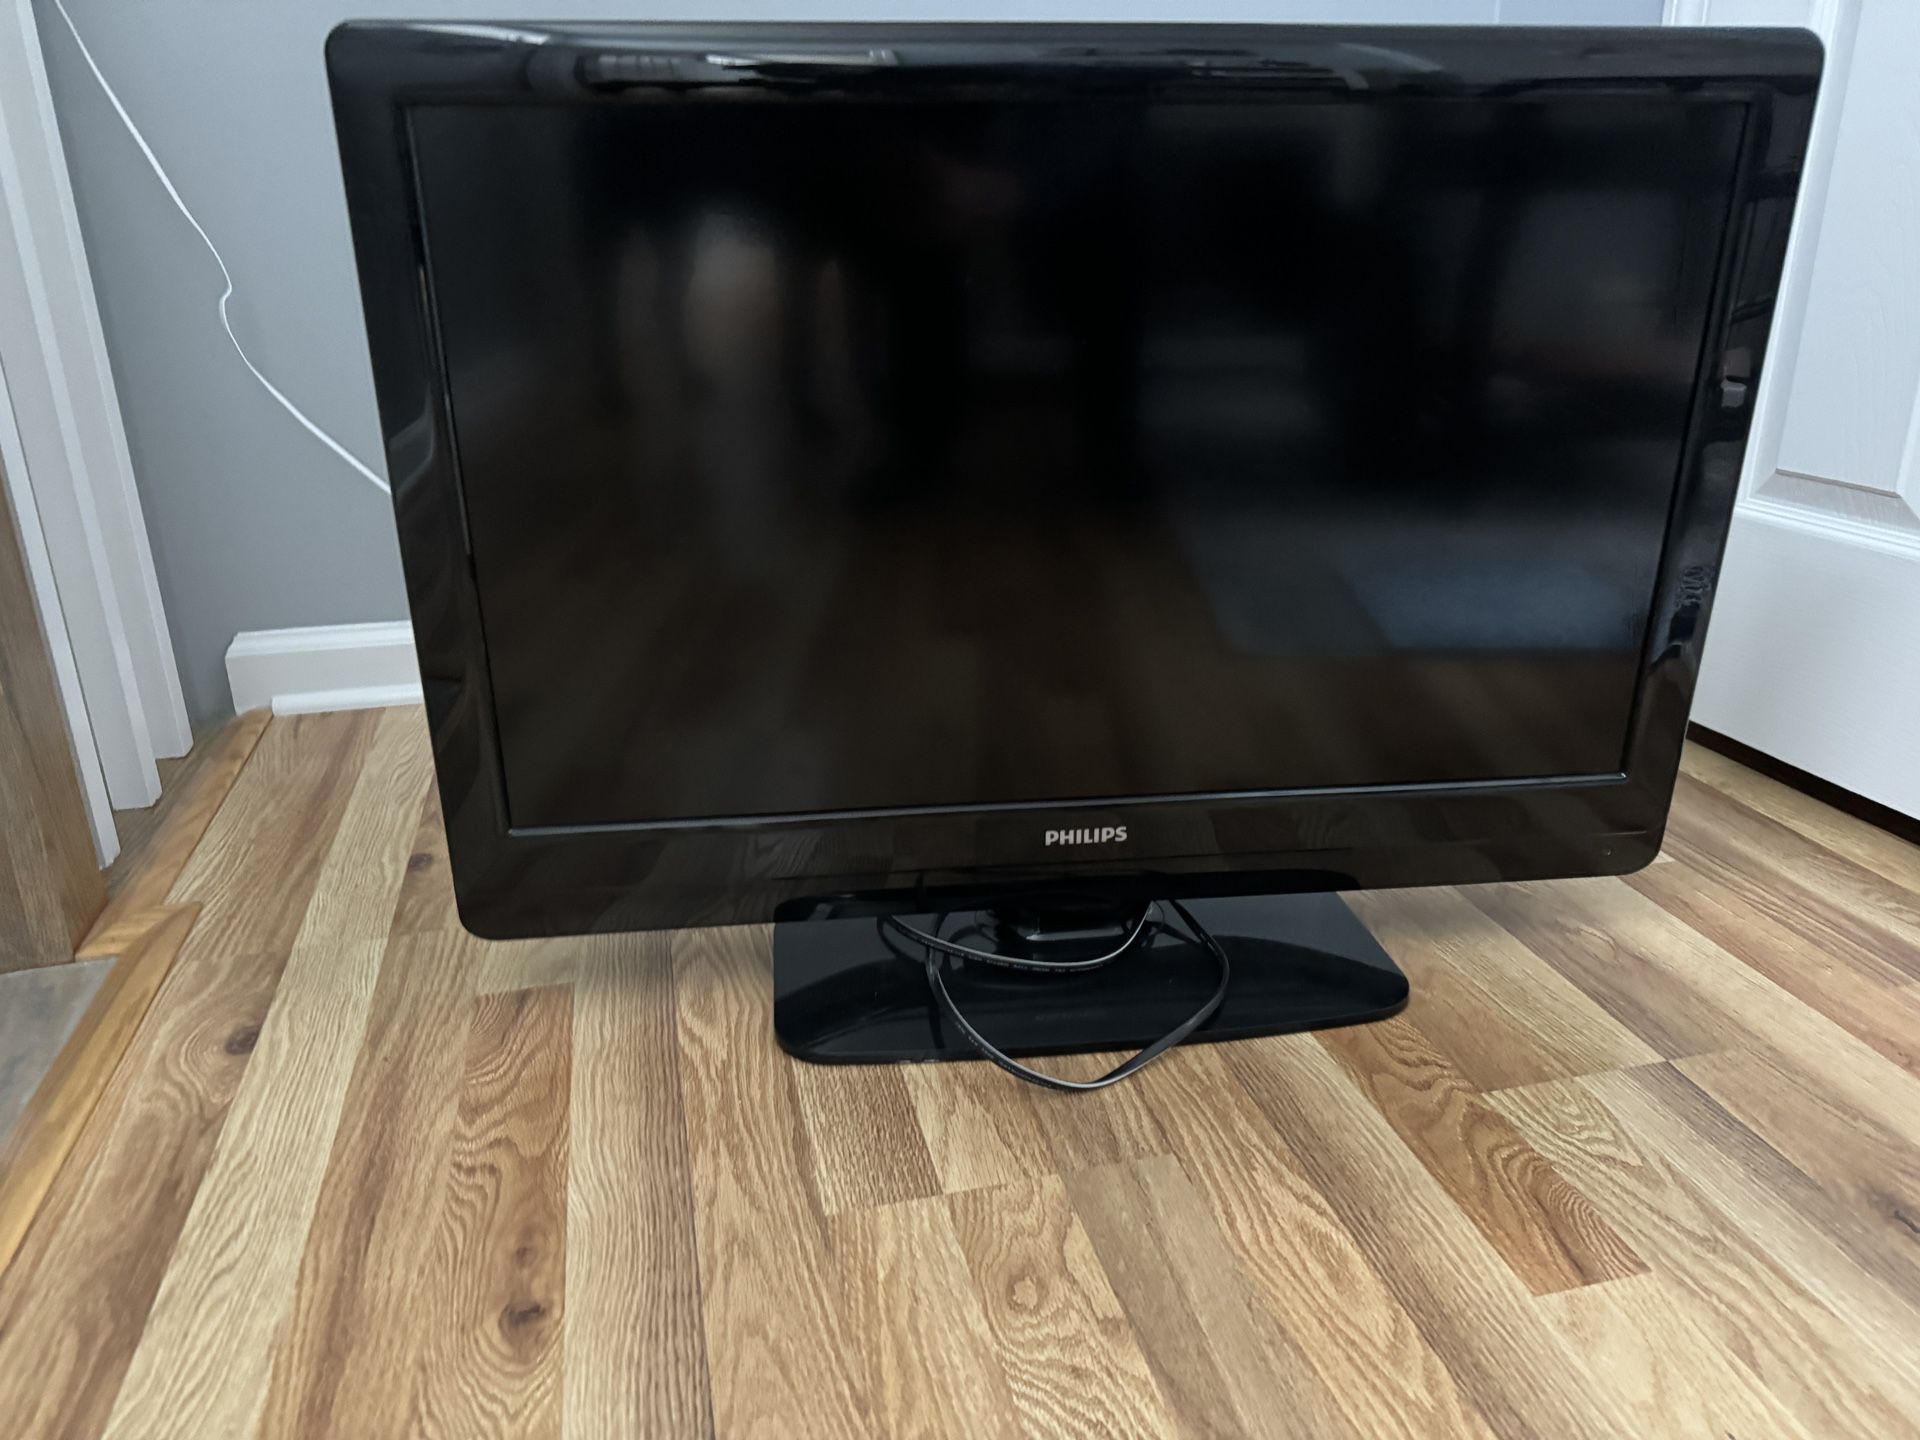 Philips 32” TV with apple TV remotes and wires